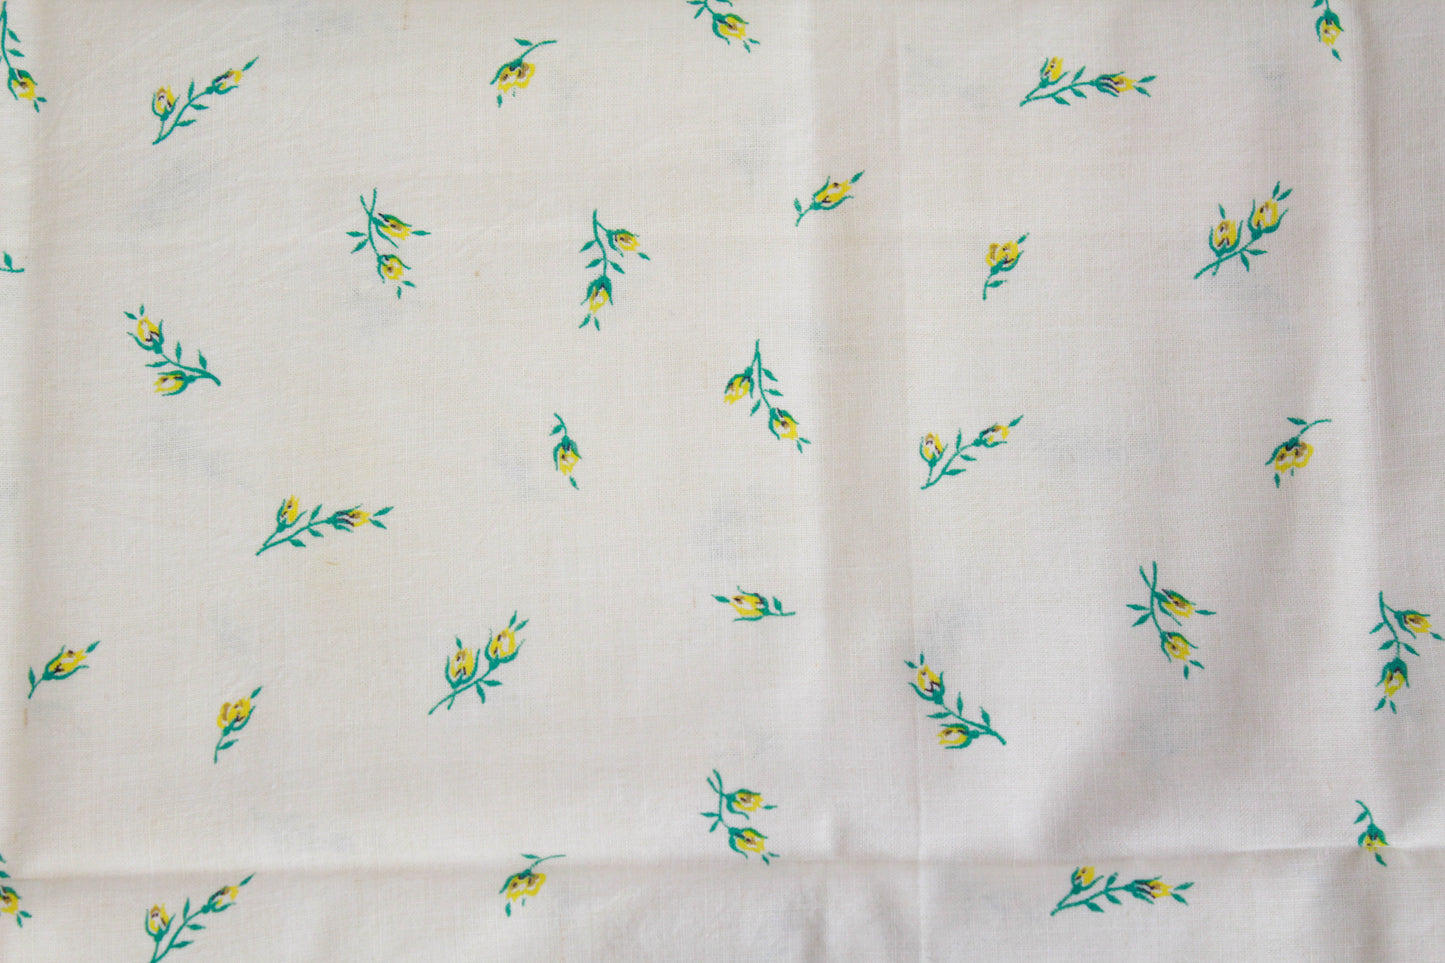 1940s Yellow Floral Print Feedsack Pillowcase (2 Available)